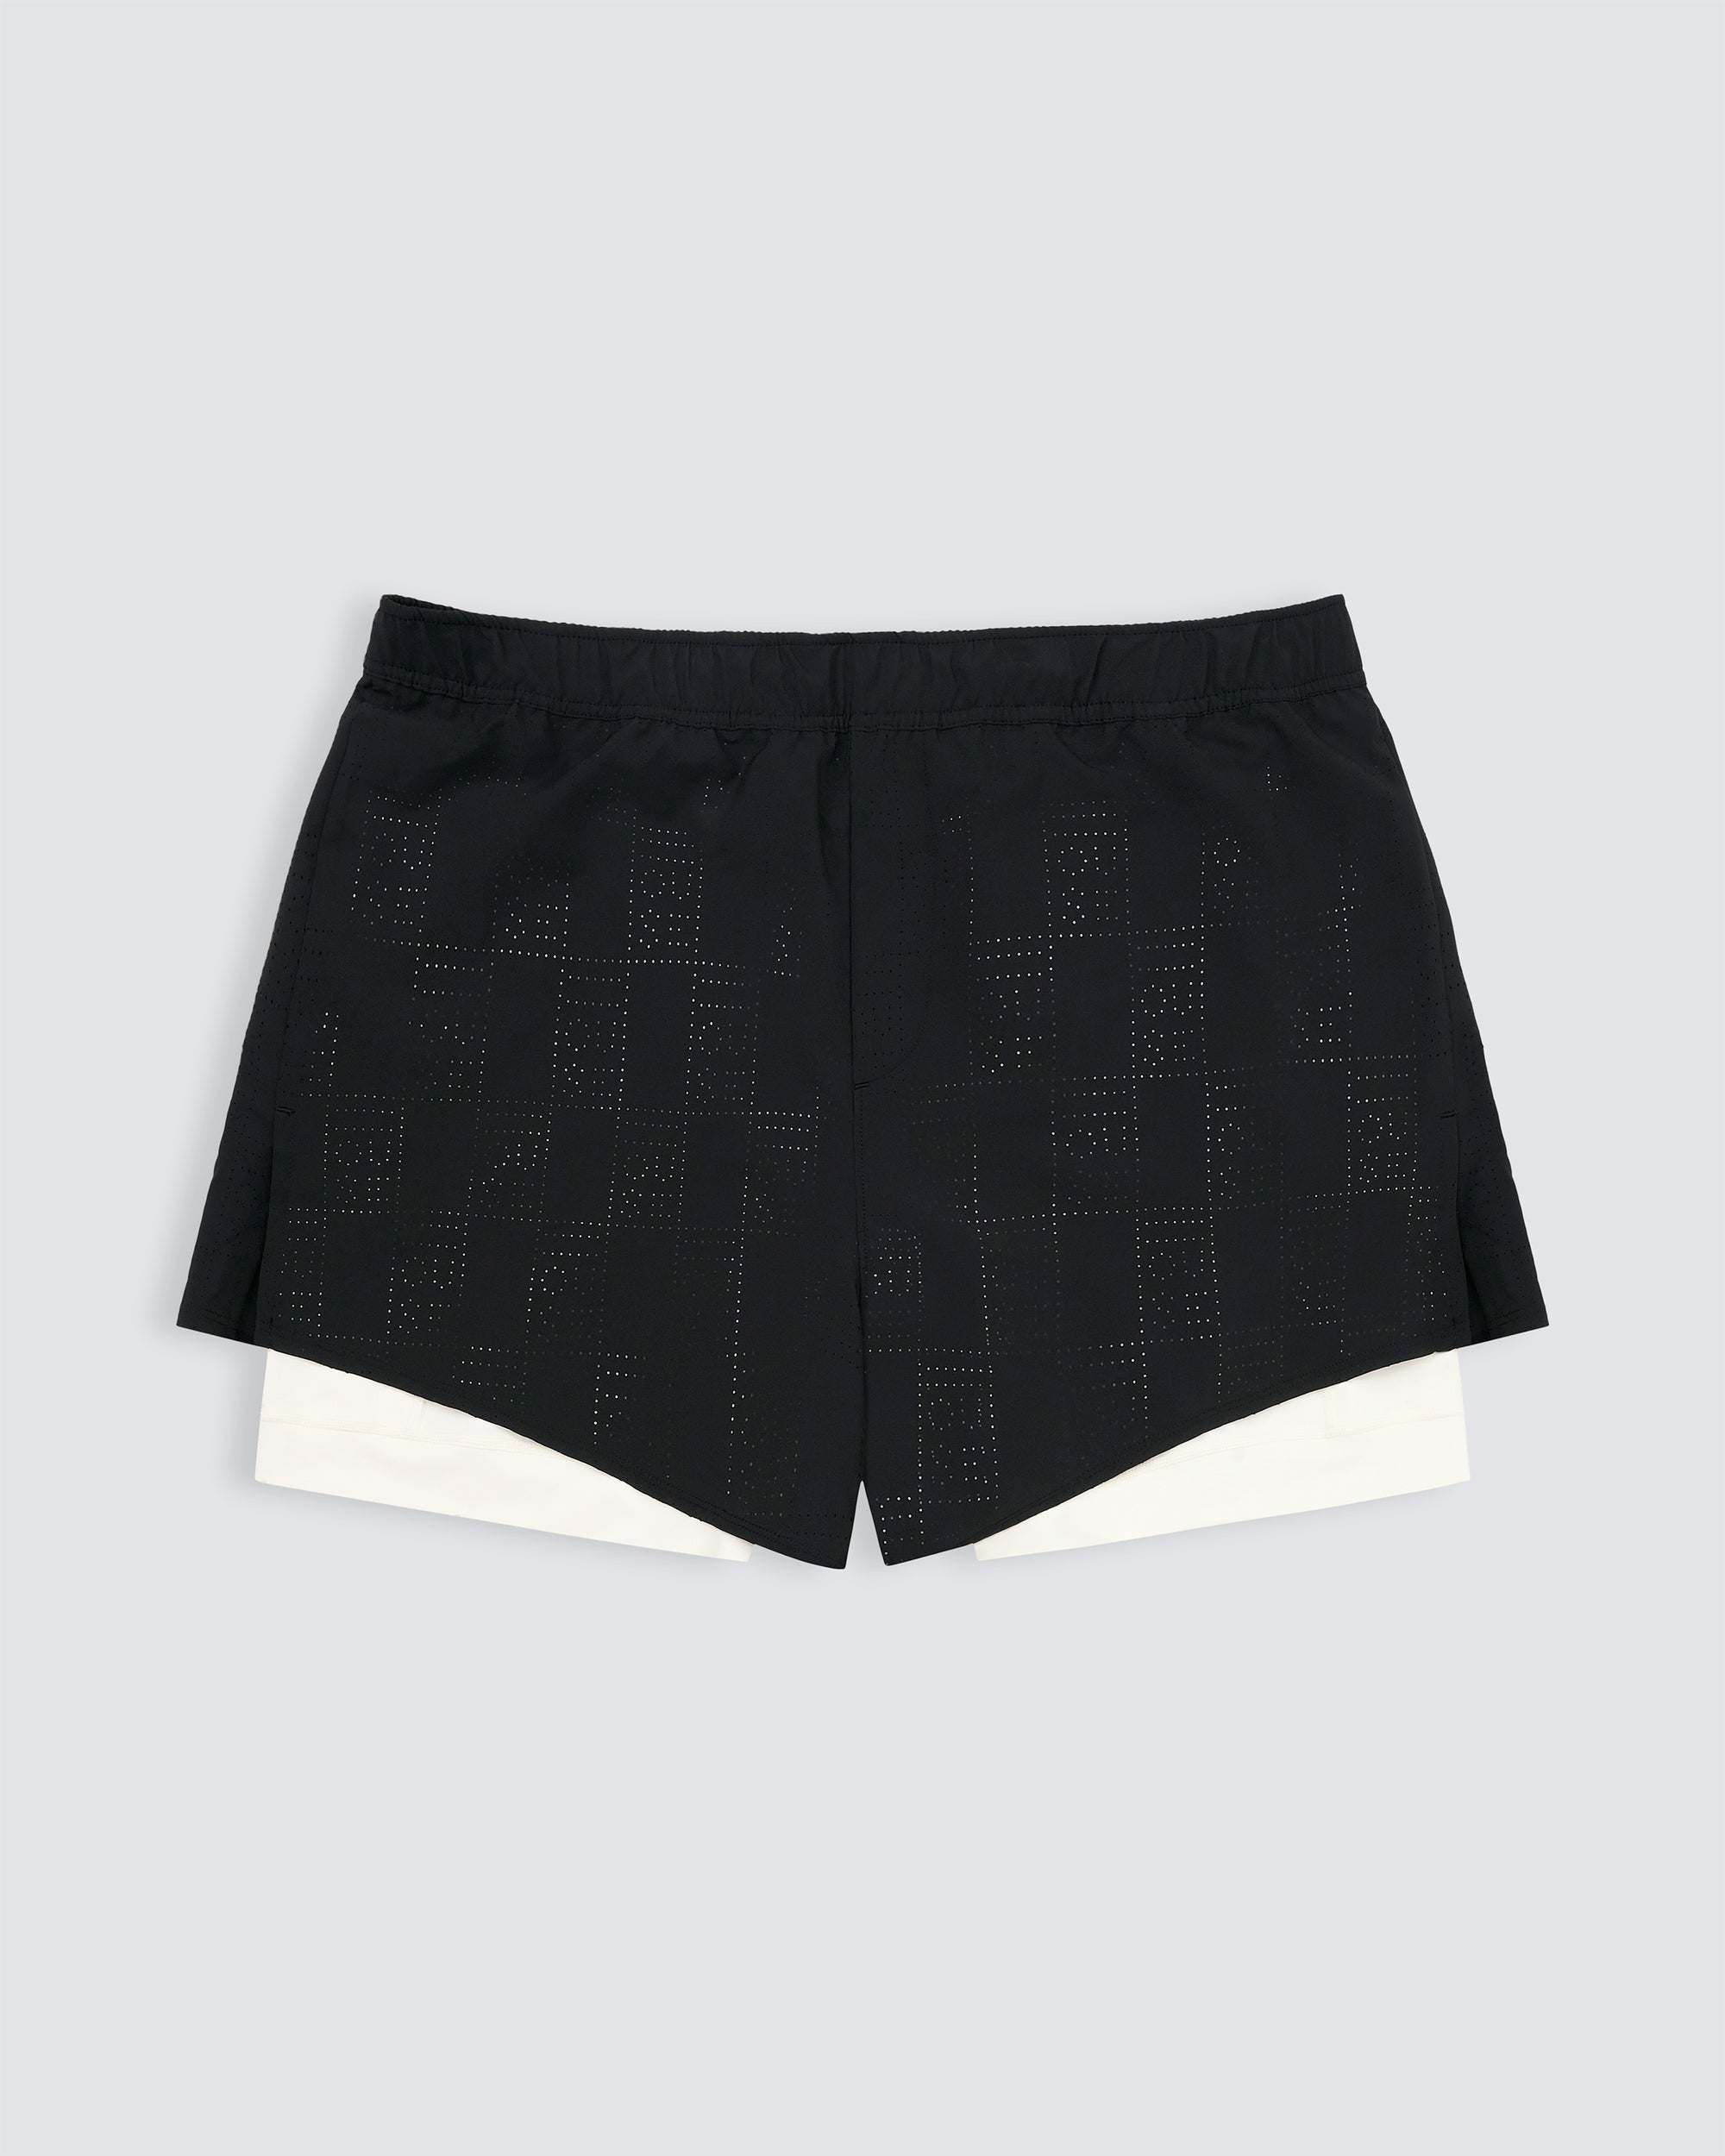 Sports shorts in black and white